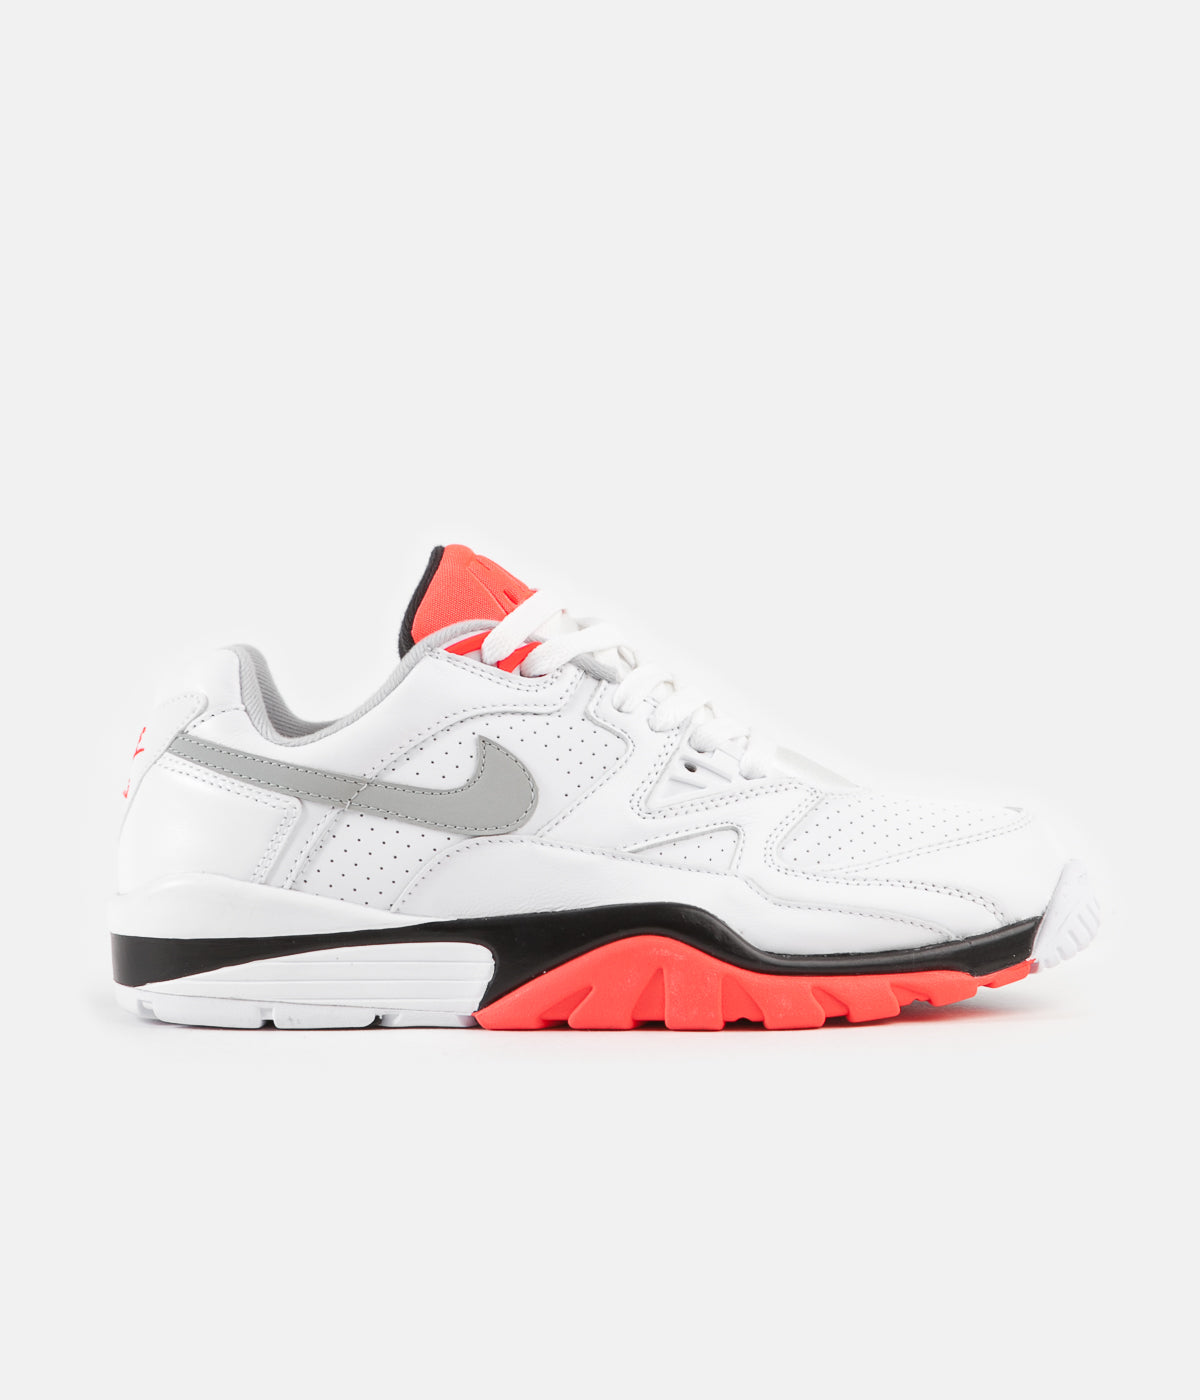 Nike Air Cross Trainer 3 Low Shoes - White / Lt Smoke Grey - Bright Cr ...